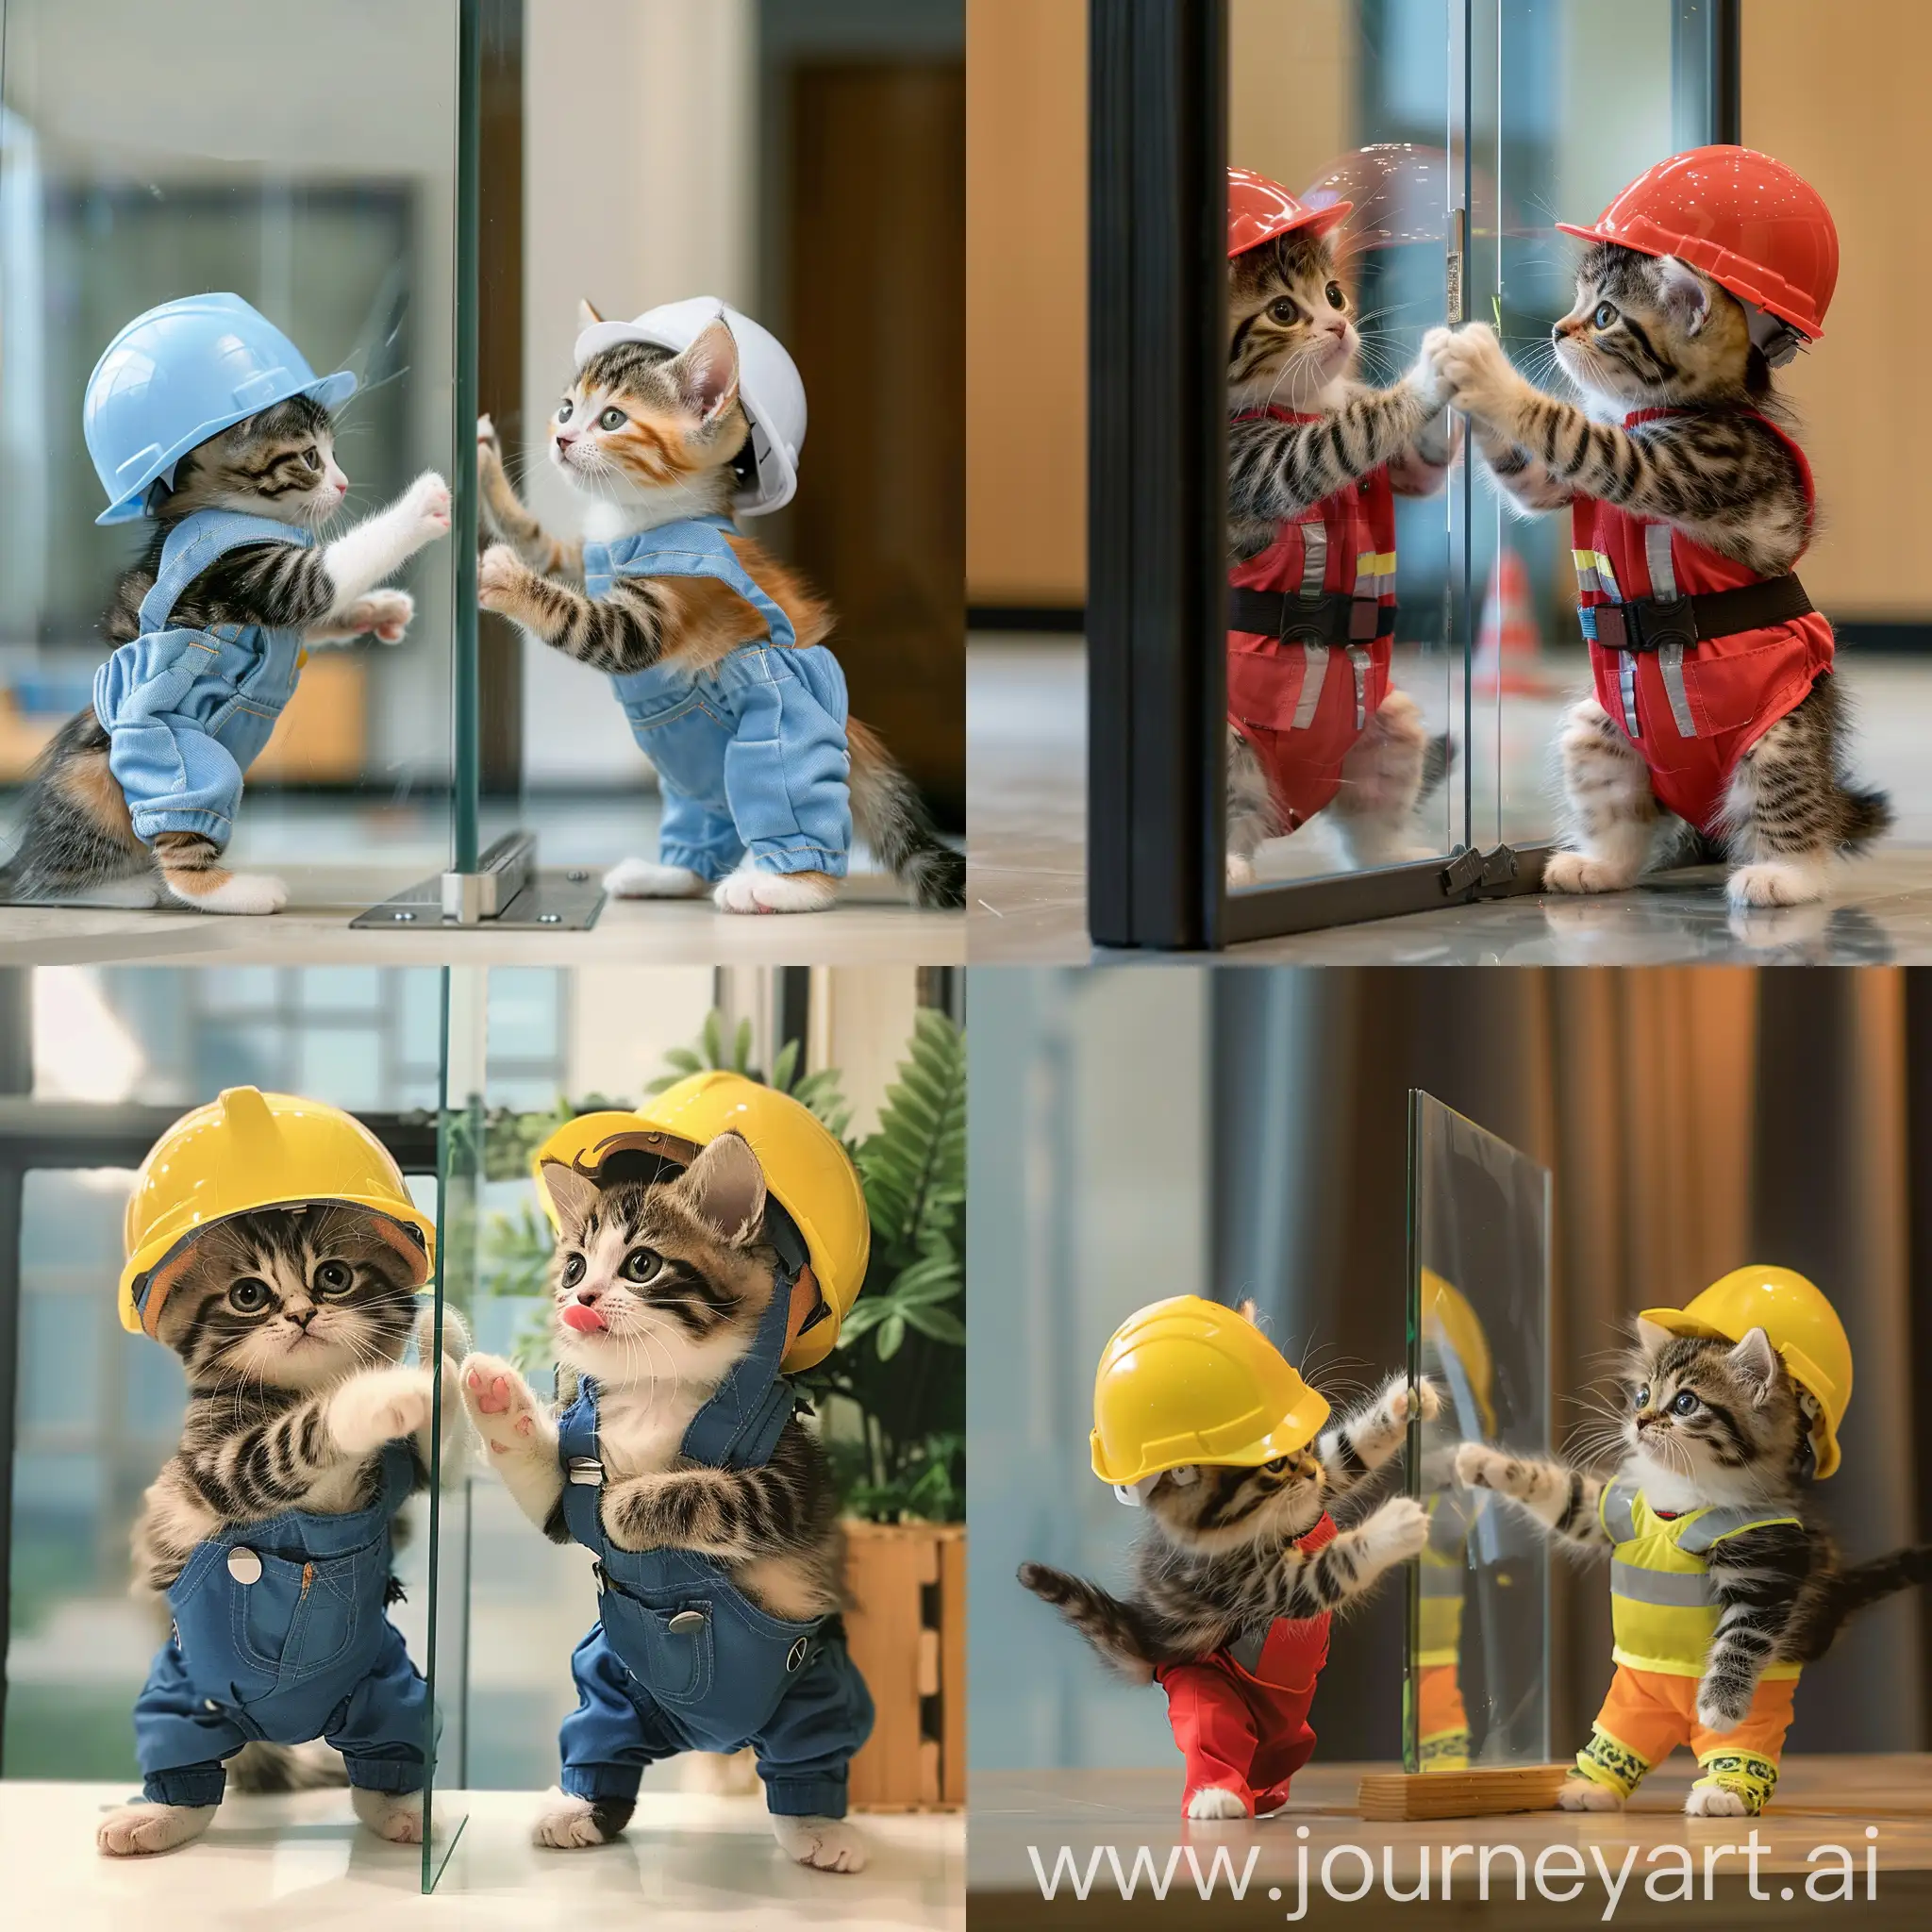 Adorable-Kittens-in-Office-Wear-Assemble-Glass-Partition-Square-Format-Version-6